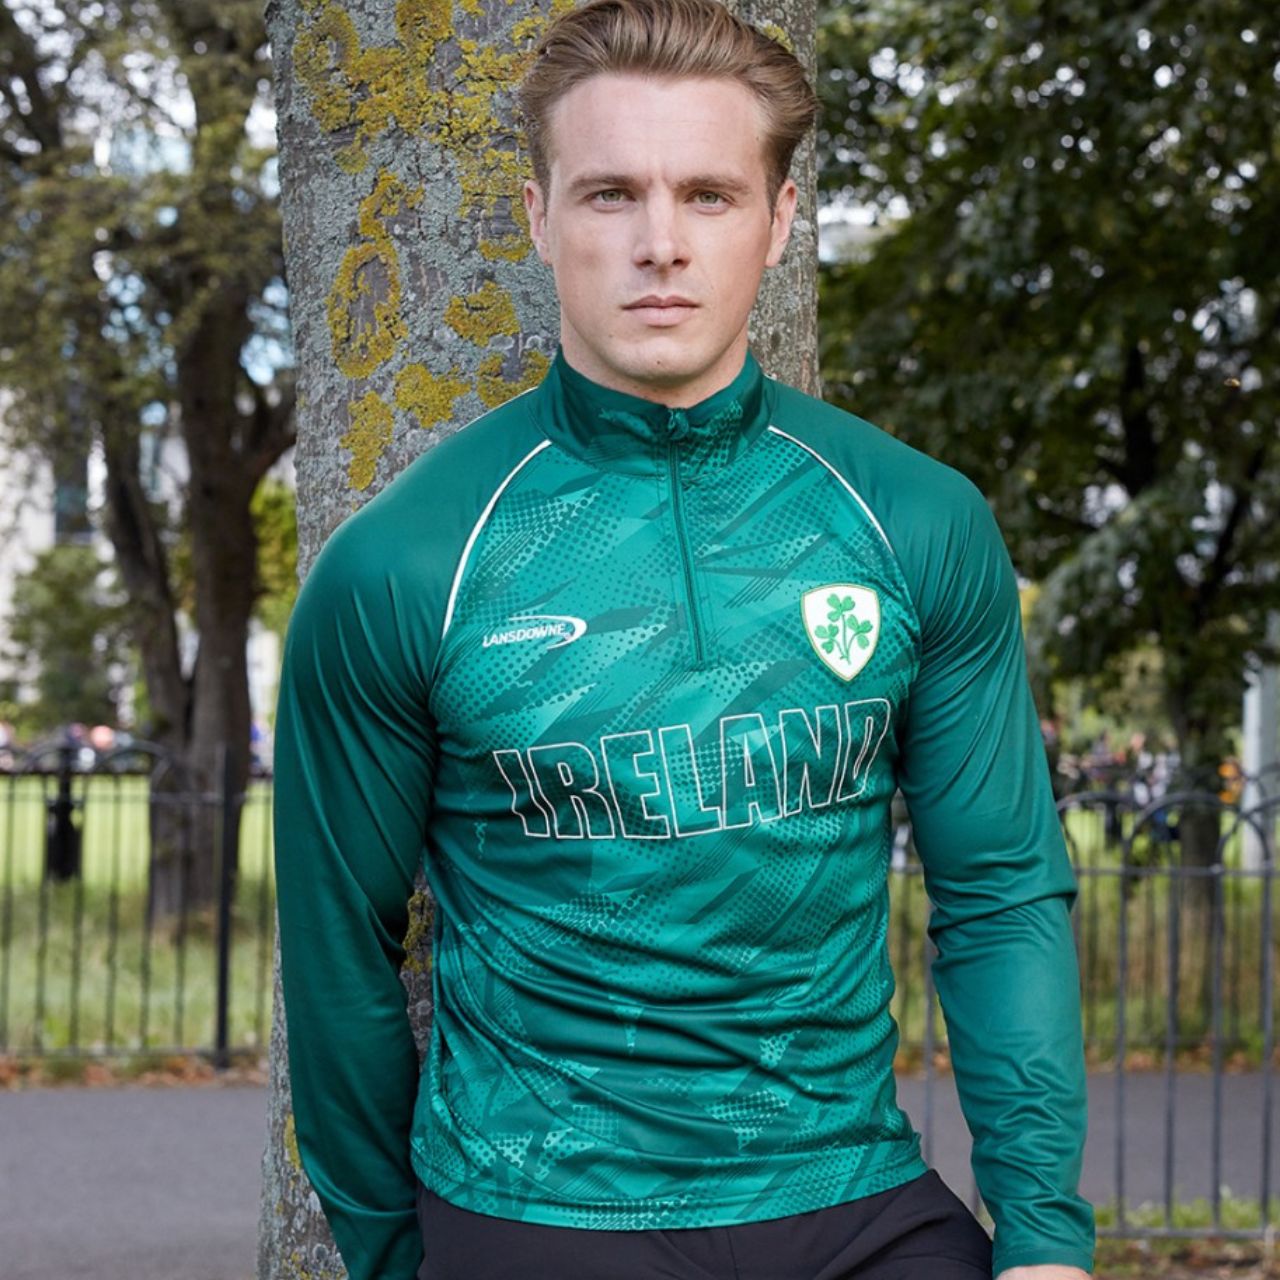 Lansdowne Adults Bottle Green Sublimated Performance 1/4 Zip Top  This 1/4 zip performance top is part of the Lansdowne Sports Official Collection. Designed in a bottle green sublimated dry fit performance material this top is ideal for sports. It stabilizes core temperature and helps draw moisture away from skin so will aid peak performance.